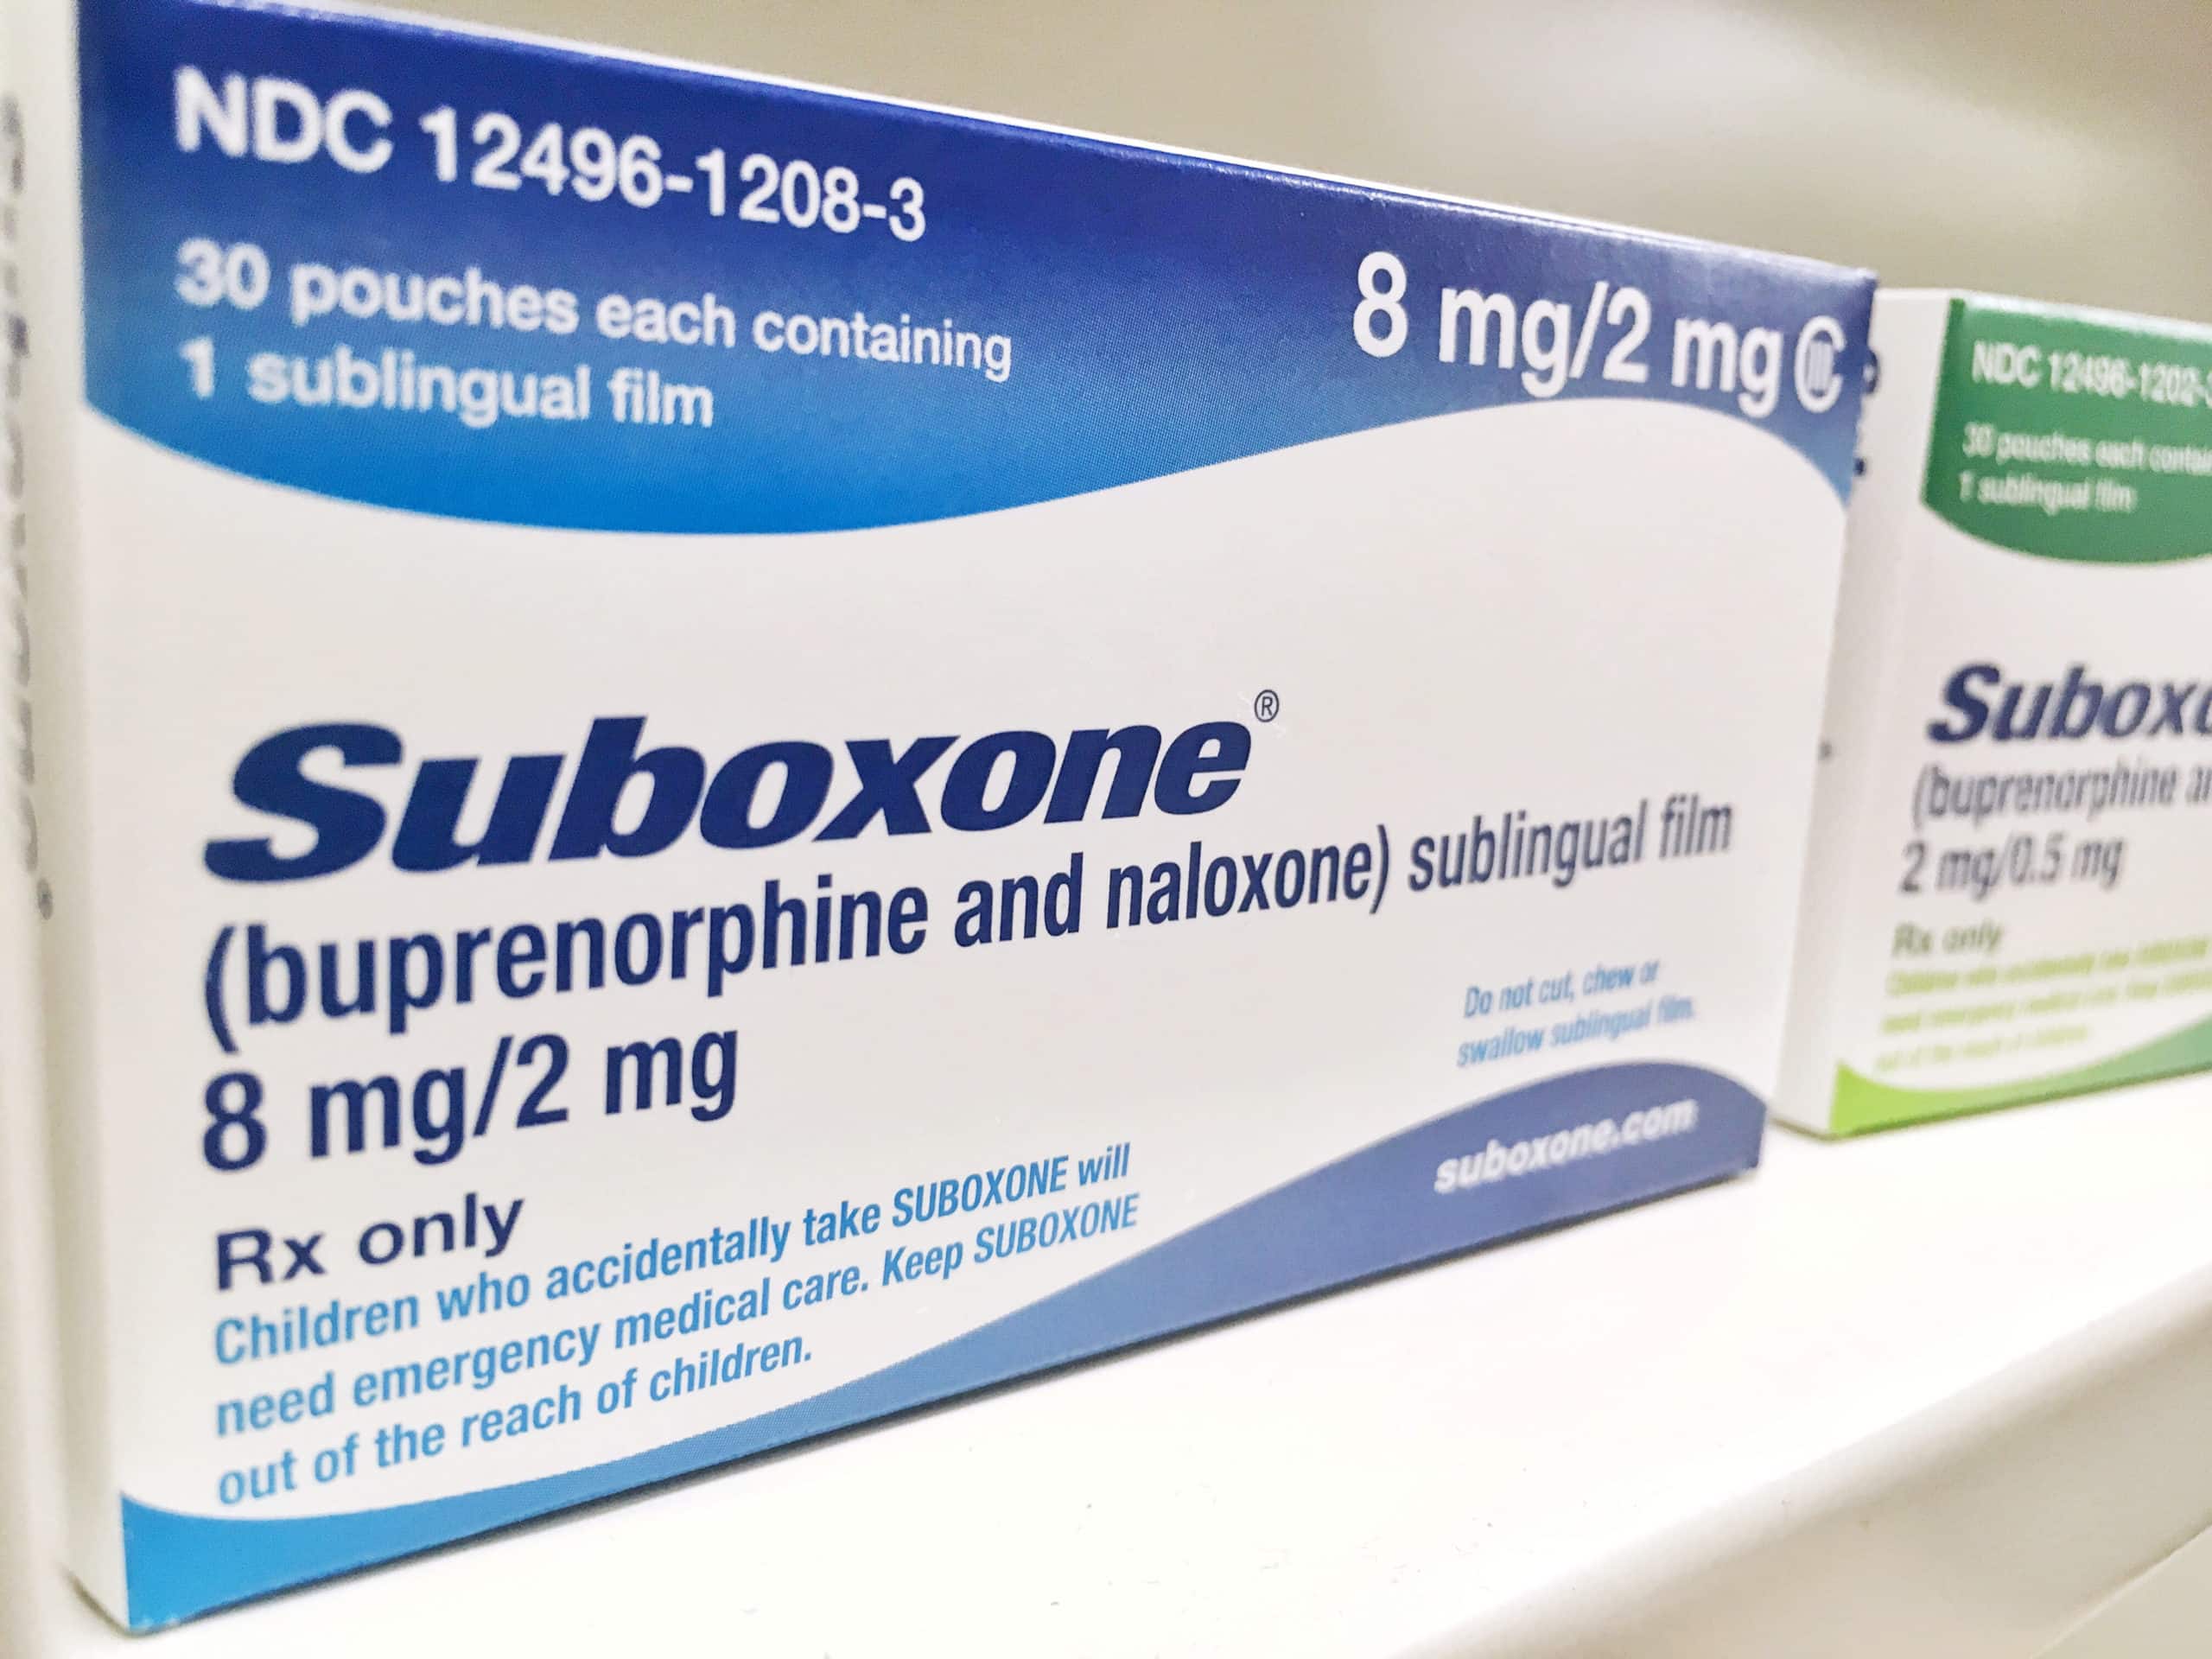 What Is Suboxone Used to Treat?